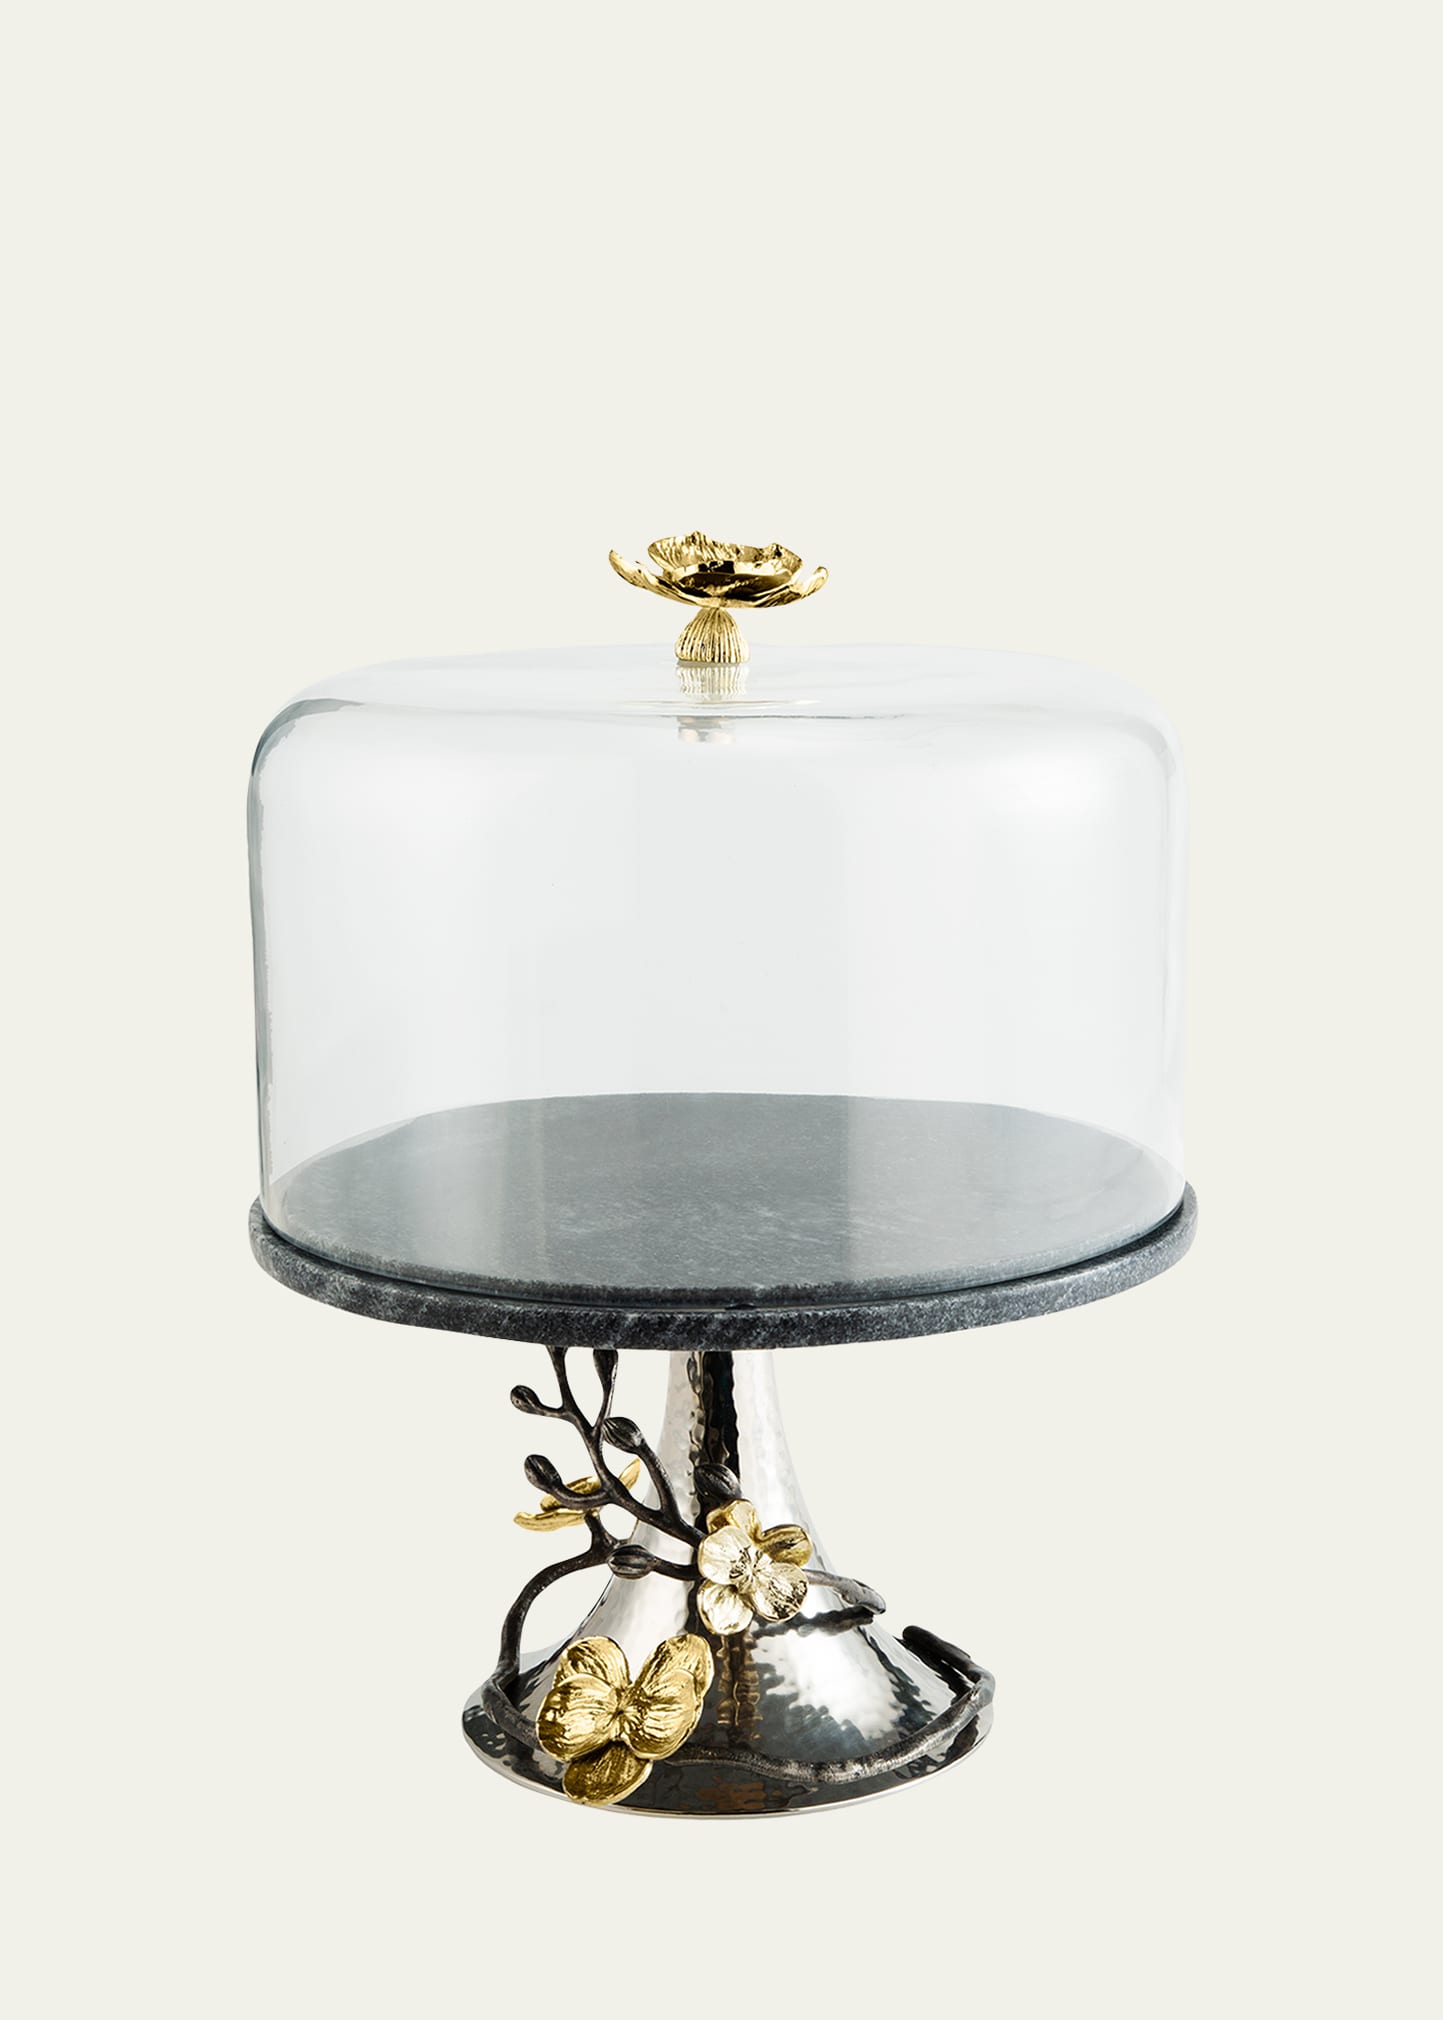 Michael Aram Gold Orchid Cake Stand with Dome